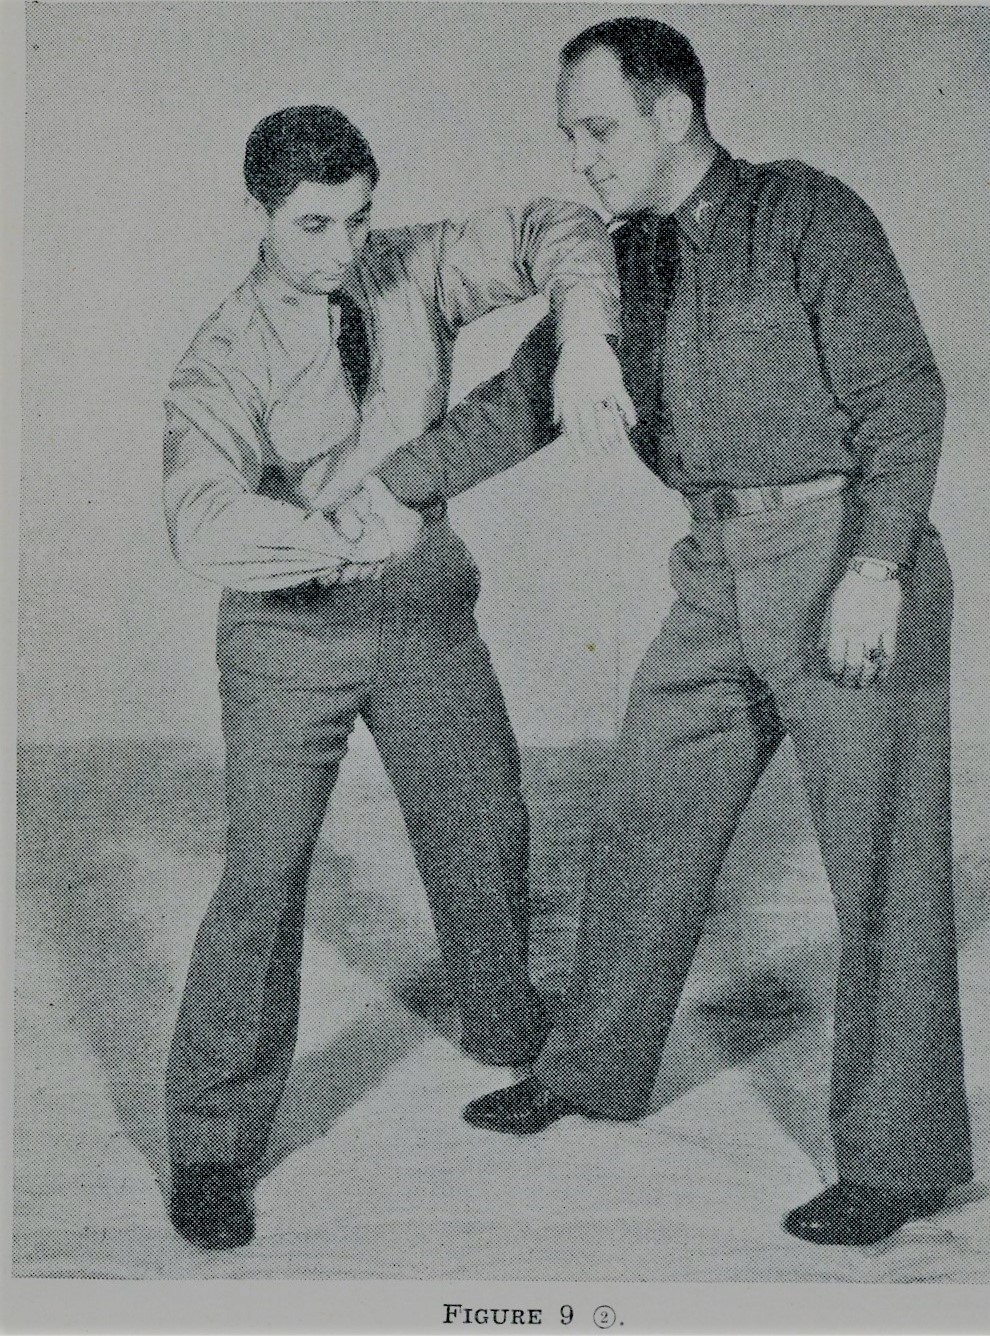 Man twisting the hand of the opponent for self defense.